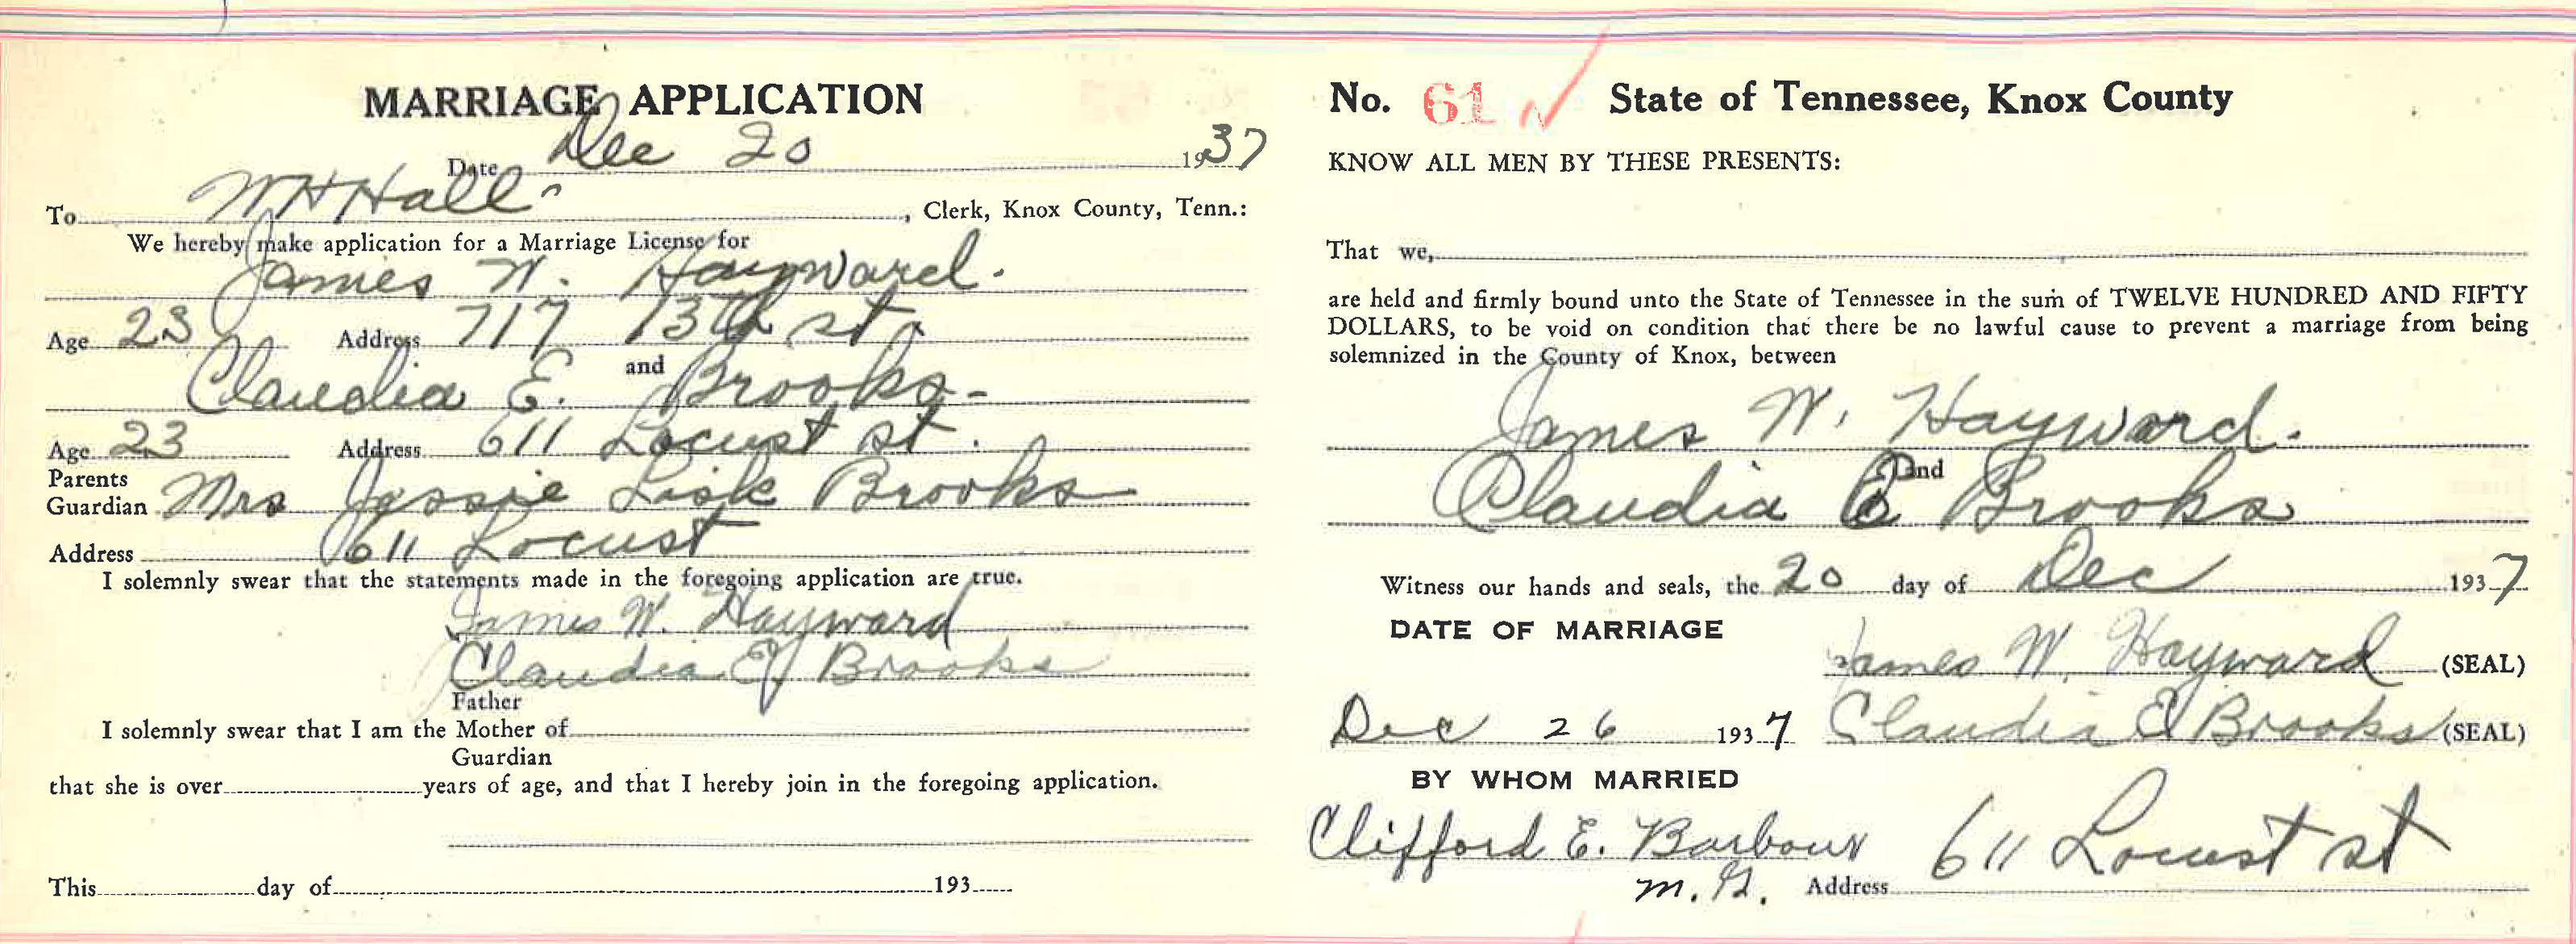 Marriage Application, Claudia Brooks and James W. Hayward, Knox County Archives